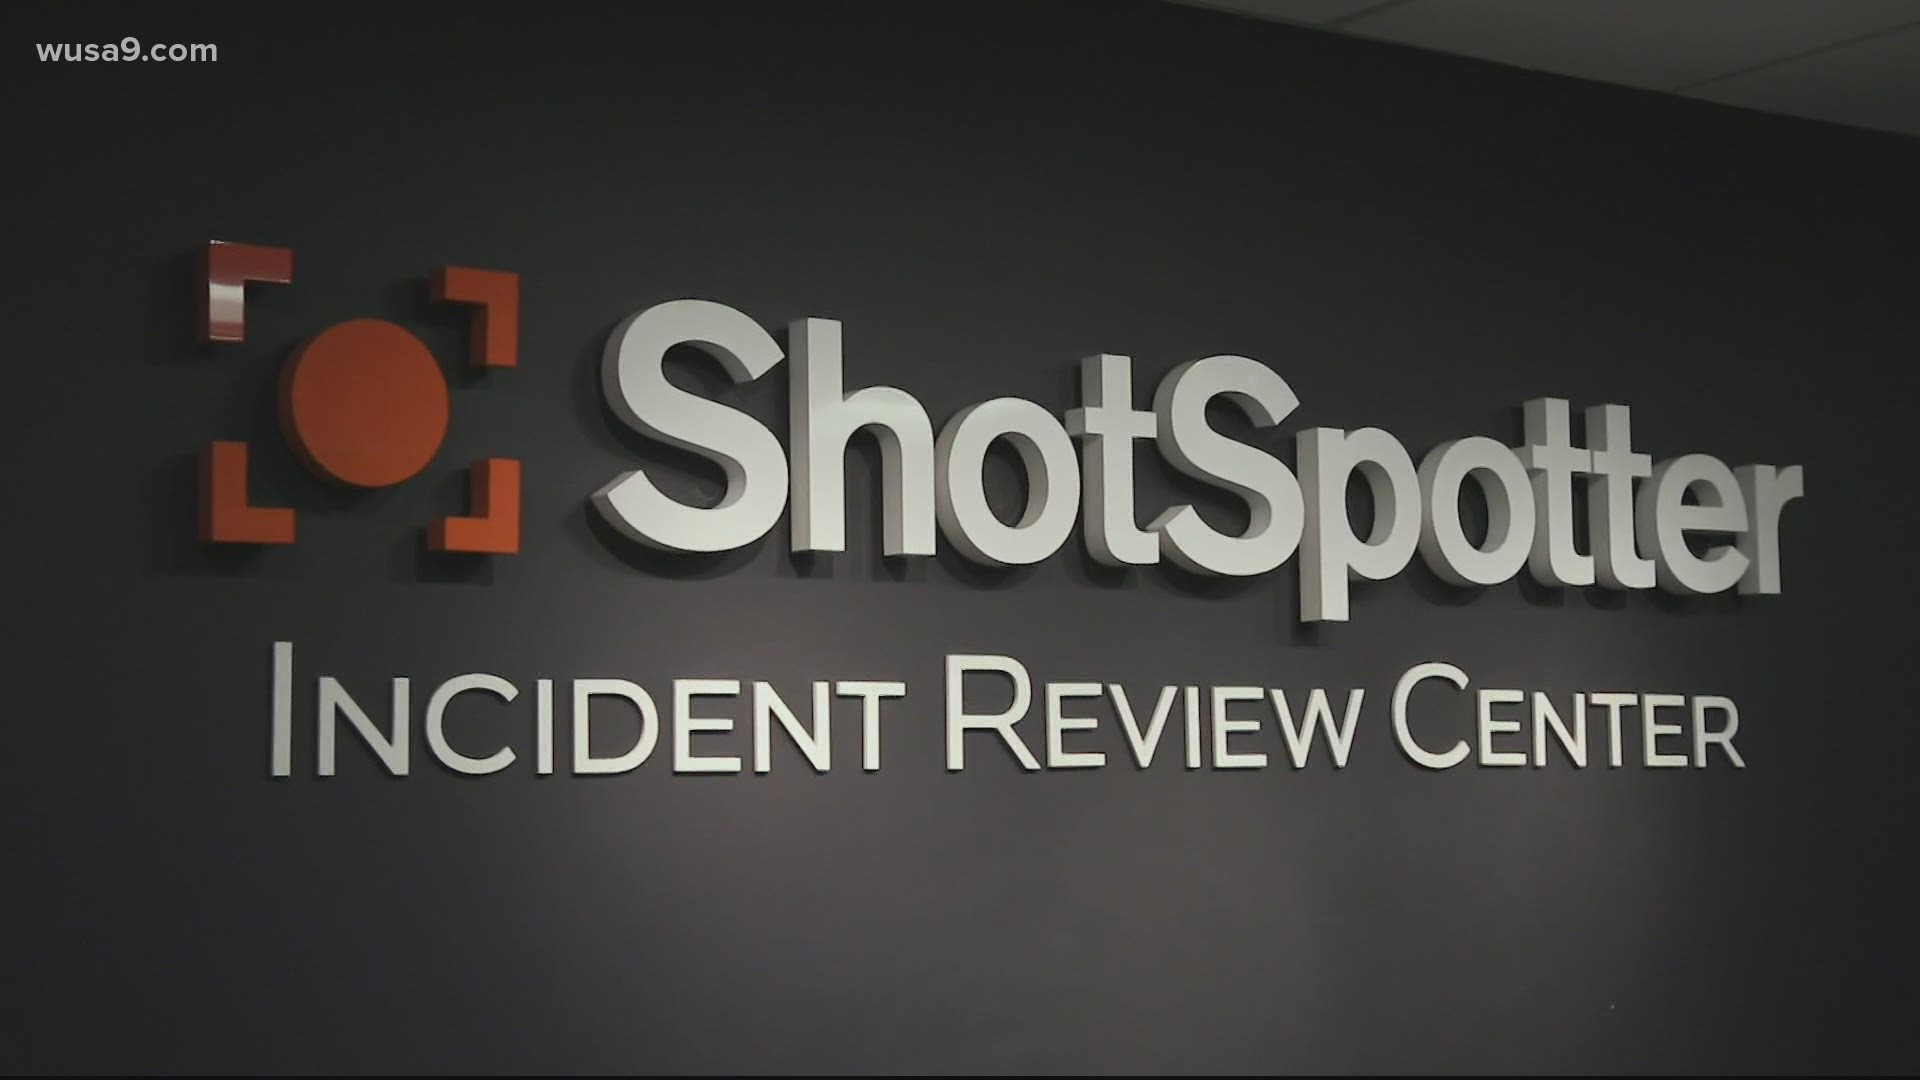 ShotSpotter helps police departments by providing real-time data on the location of gunfire through the use of strategically-placed microphones across cities.